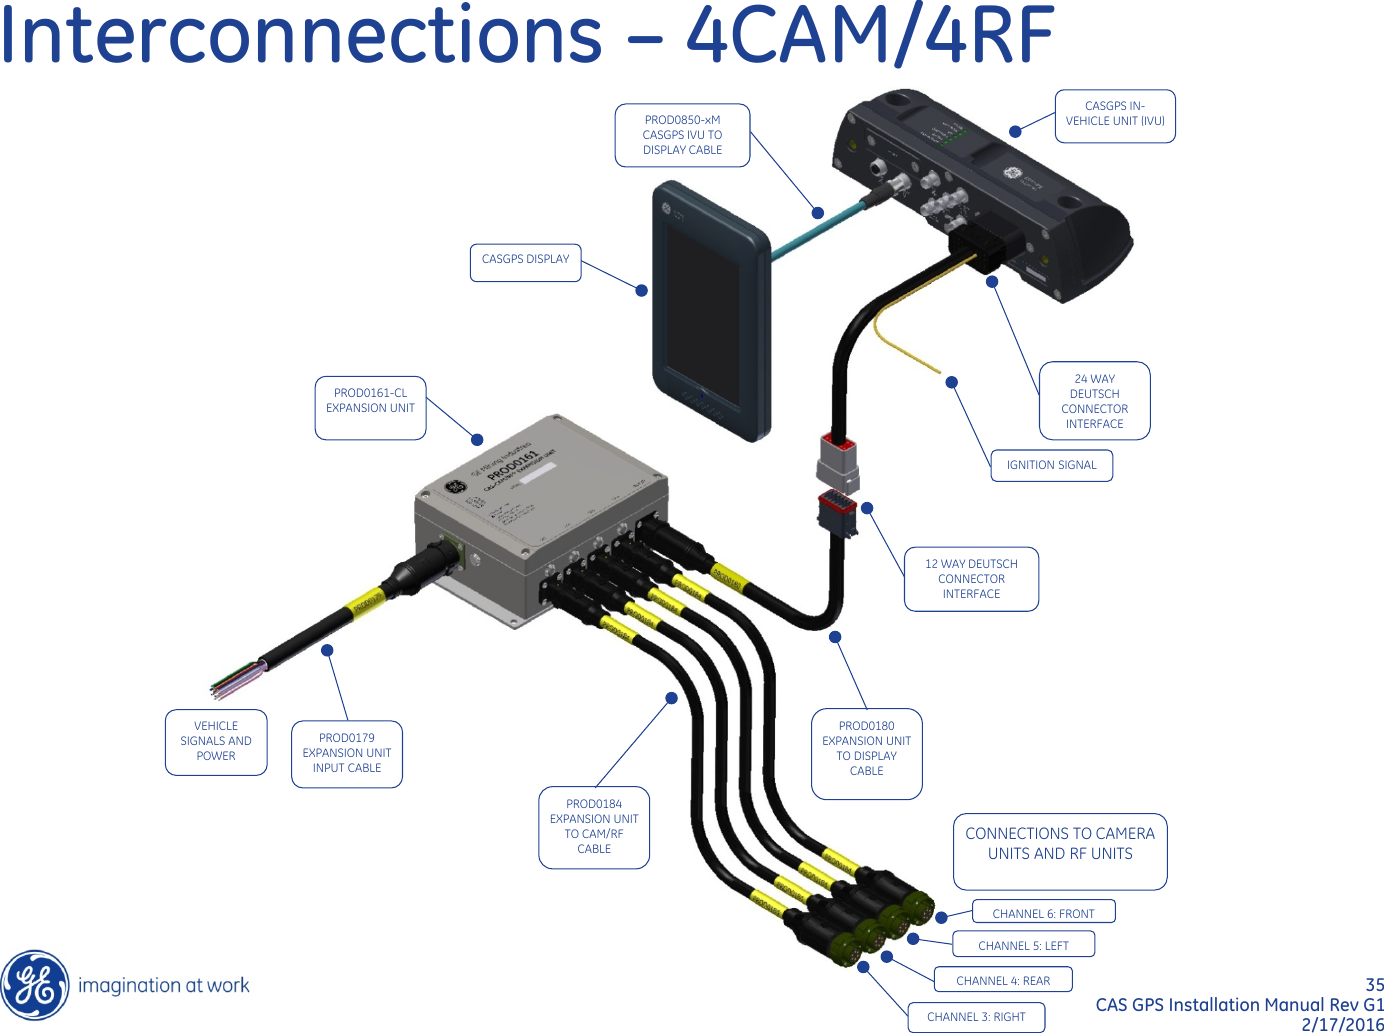 35  CAS GPS Installation Manual Rev G1 2/17/2016 Interconnections – 4CAM/4RF PROD0179 EXPANSION UNIT INPUT CABLE PROD0180 EXPANSION UNIT TO DISPLAY CABLE 12 WAY DEUTSCH CONNECTOR INTERFACE 24 WAY DEUTSCH CONNECTOR INTERFACE CASGPS DISPLAY CASGPS IN-VEHICLE UNIT (IVU) PROD0850-xM CASGPS IVU TO DISPLAY CABLE PROD0161-CL EXPANSION UNIT  PROD0184 EXPANSION UNIT TO CAM/RF CABLE CONNECTIONS TO CAMERA UNITS AND RF UNITS CHANNEL 6: FRONT CHANNEL 5: LEFT CHANNEL 4: REAR CHANNEL 3: RIGHT IGNITION SIGNAL VEHICLE SIGNALS AND POWER 